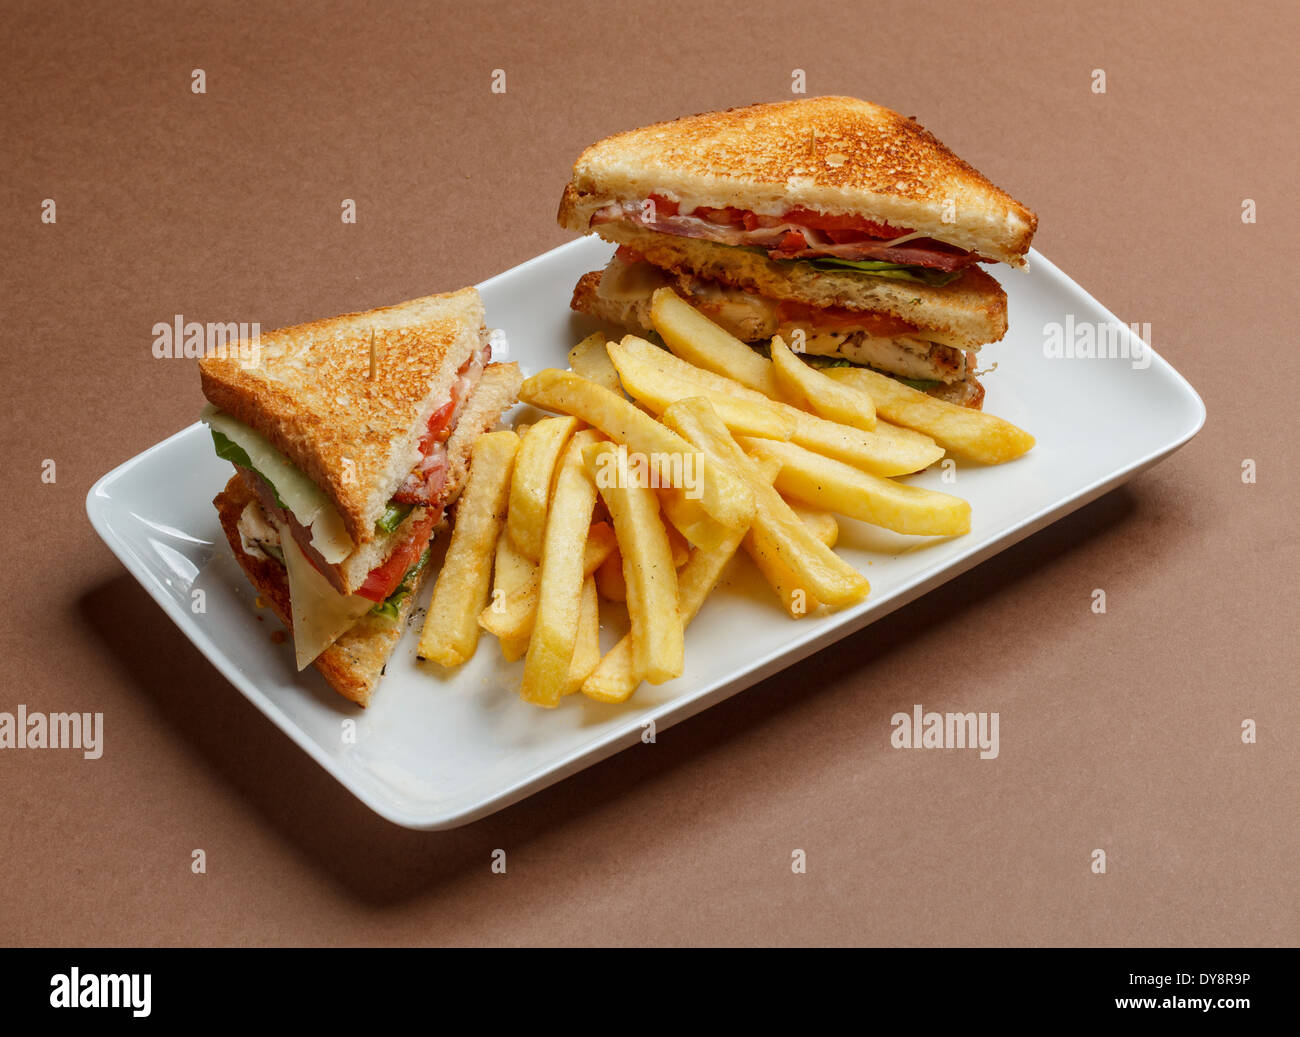 Club sandwich with toasted bread Stock Photo